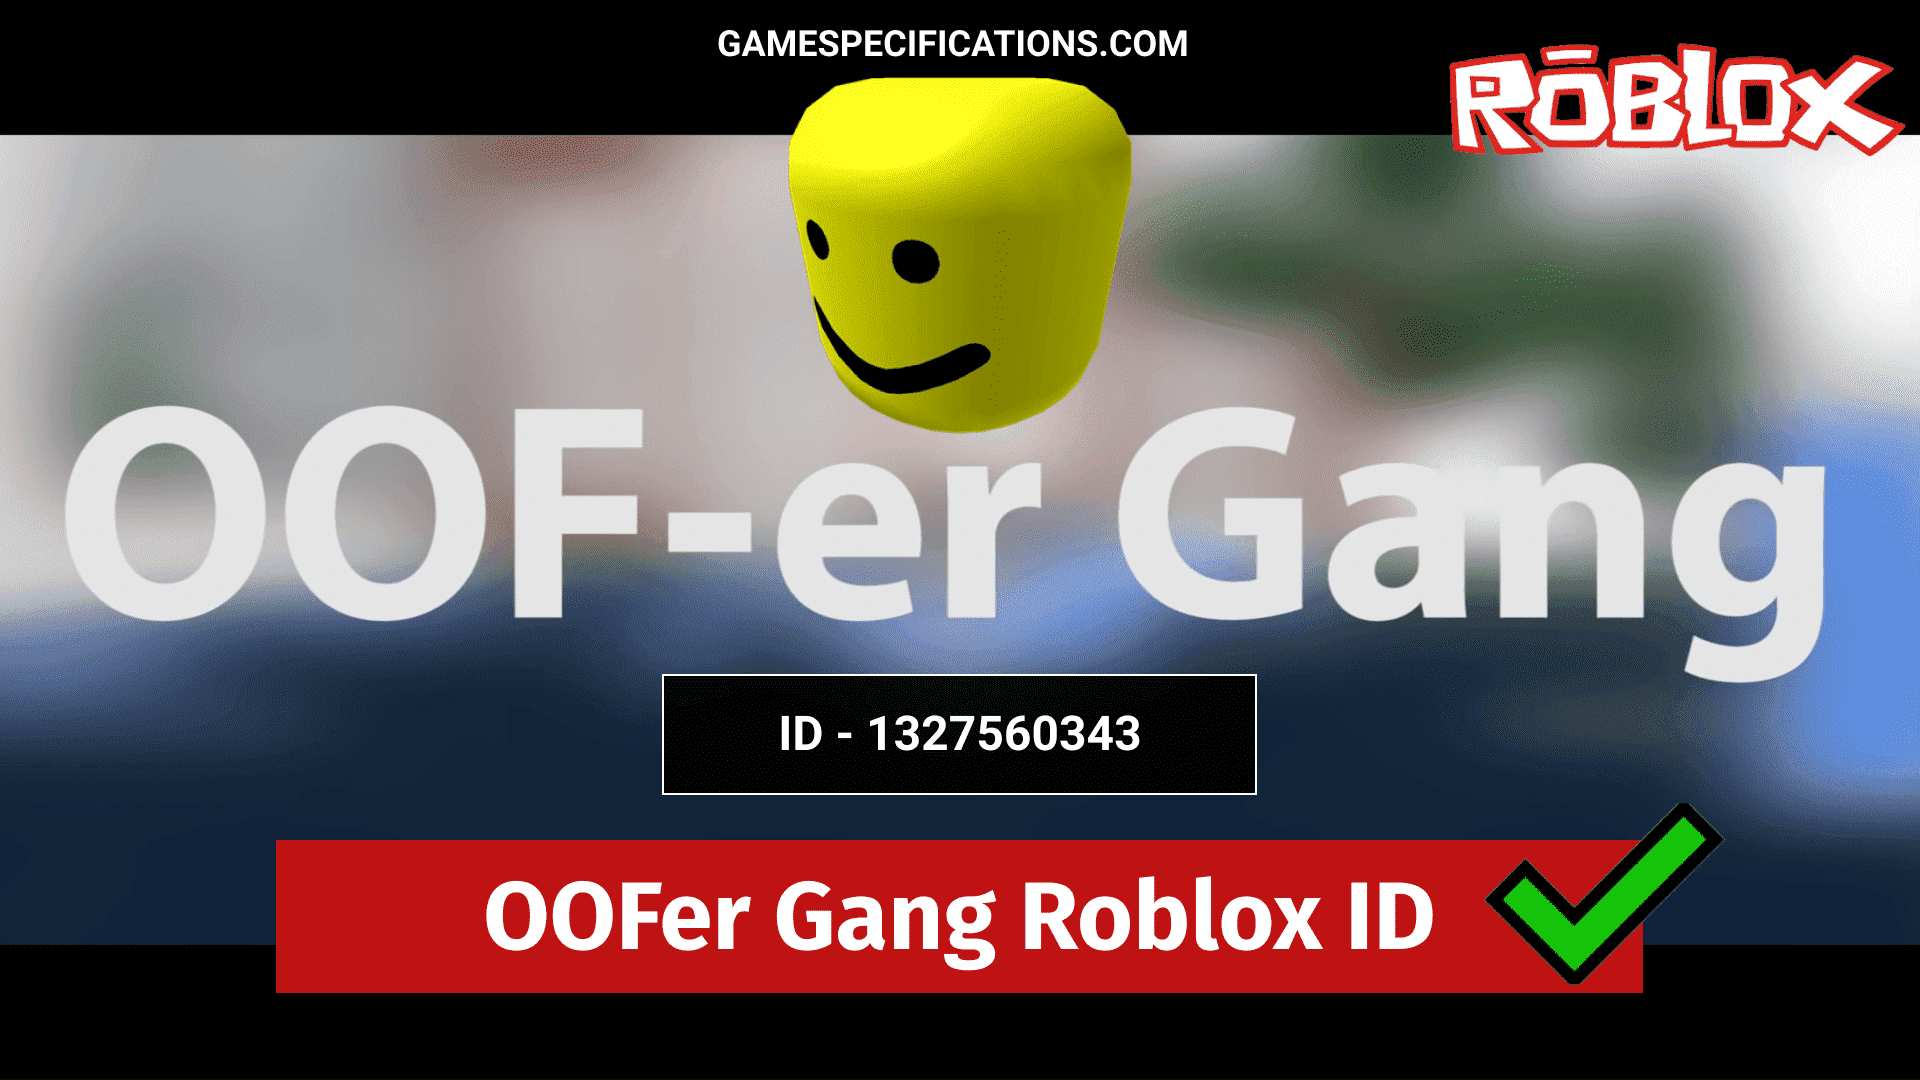 Oofer Gang Roblox Id Codes 2021 Game Specifications - gucci gang roblox id